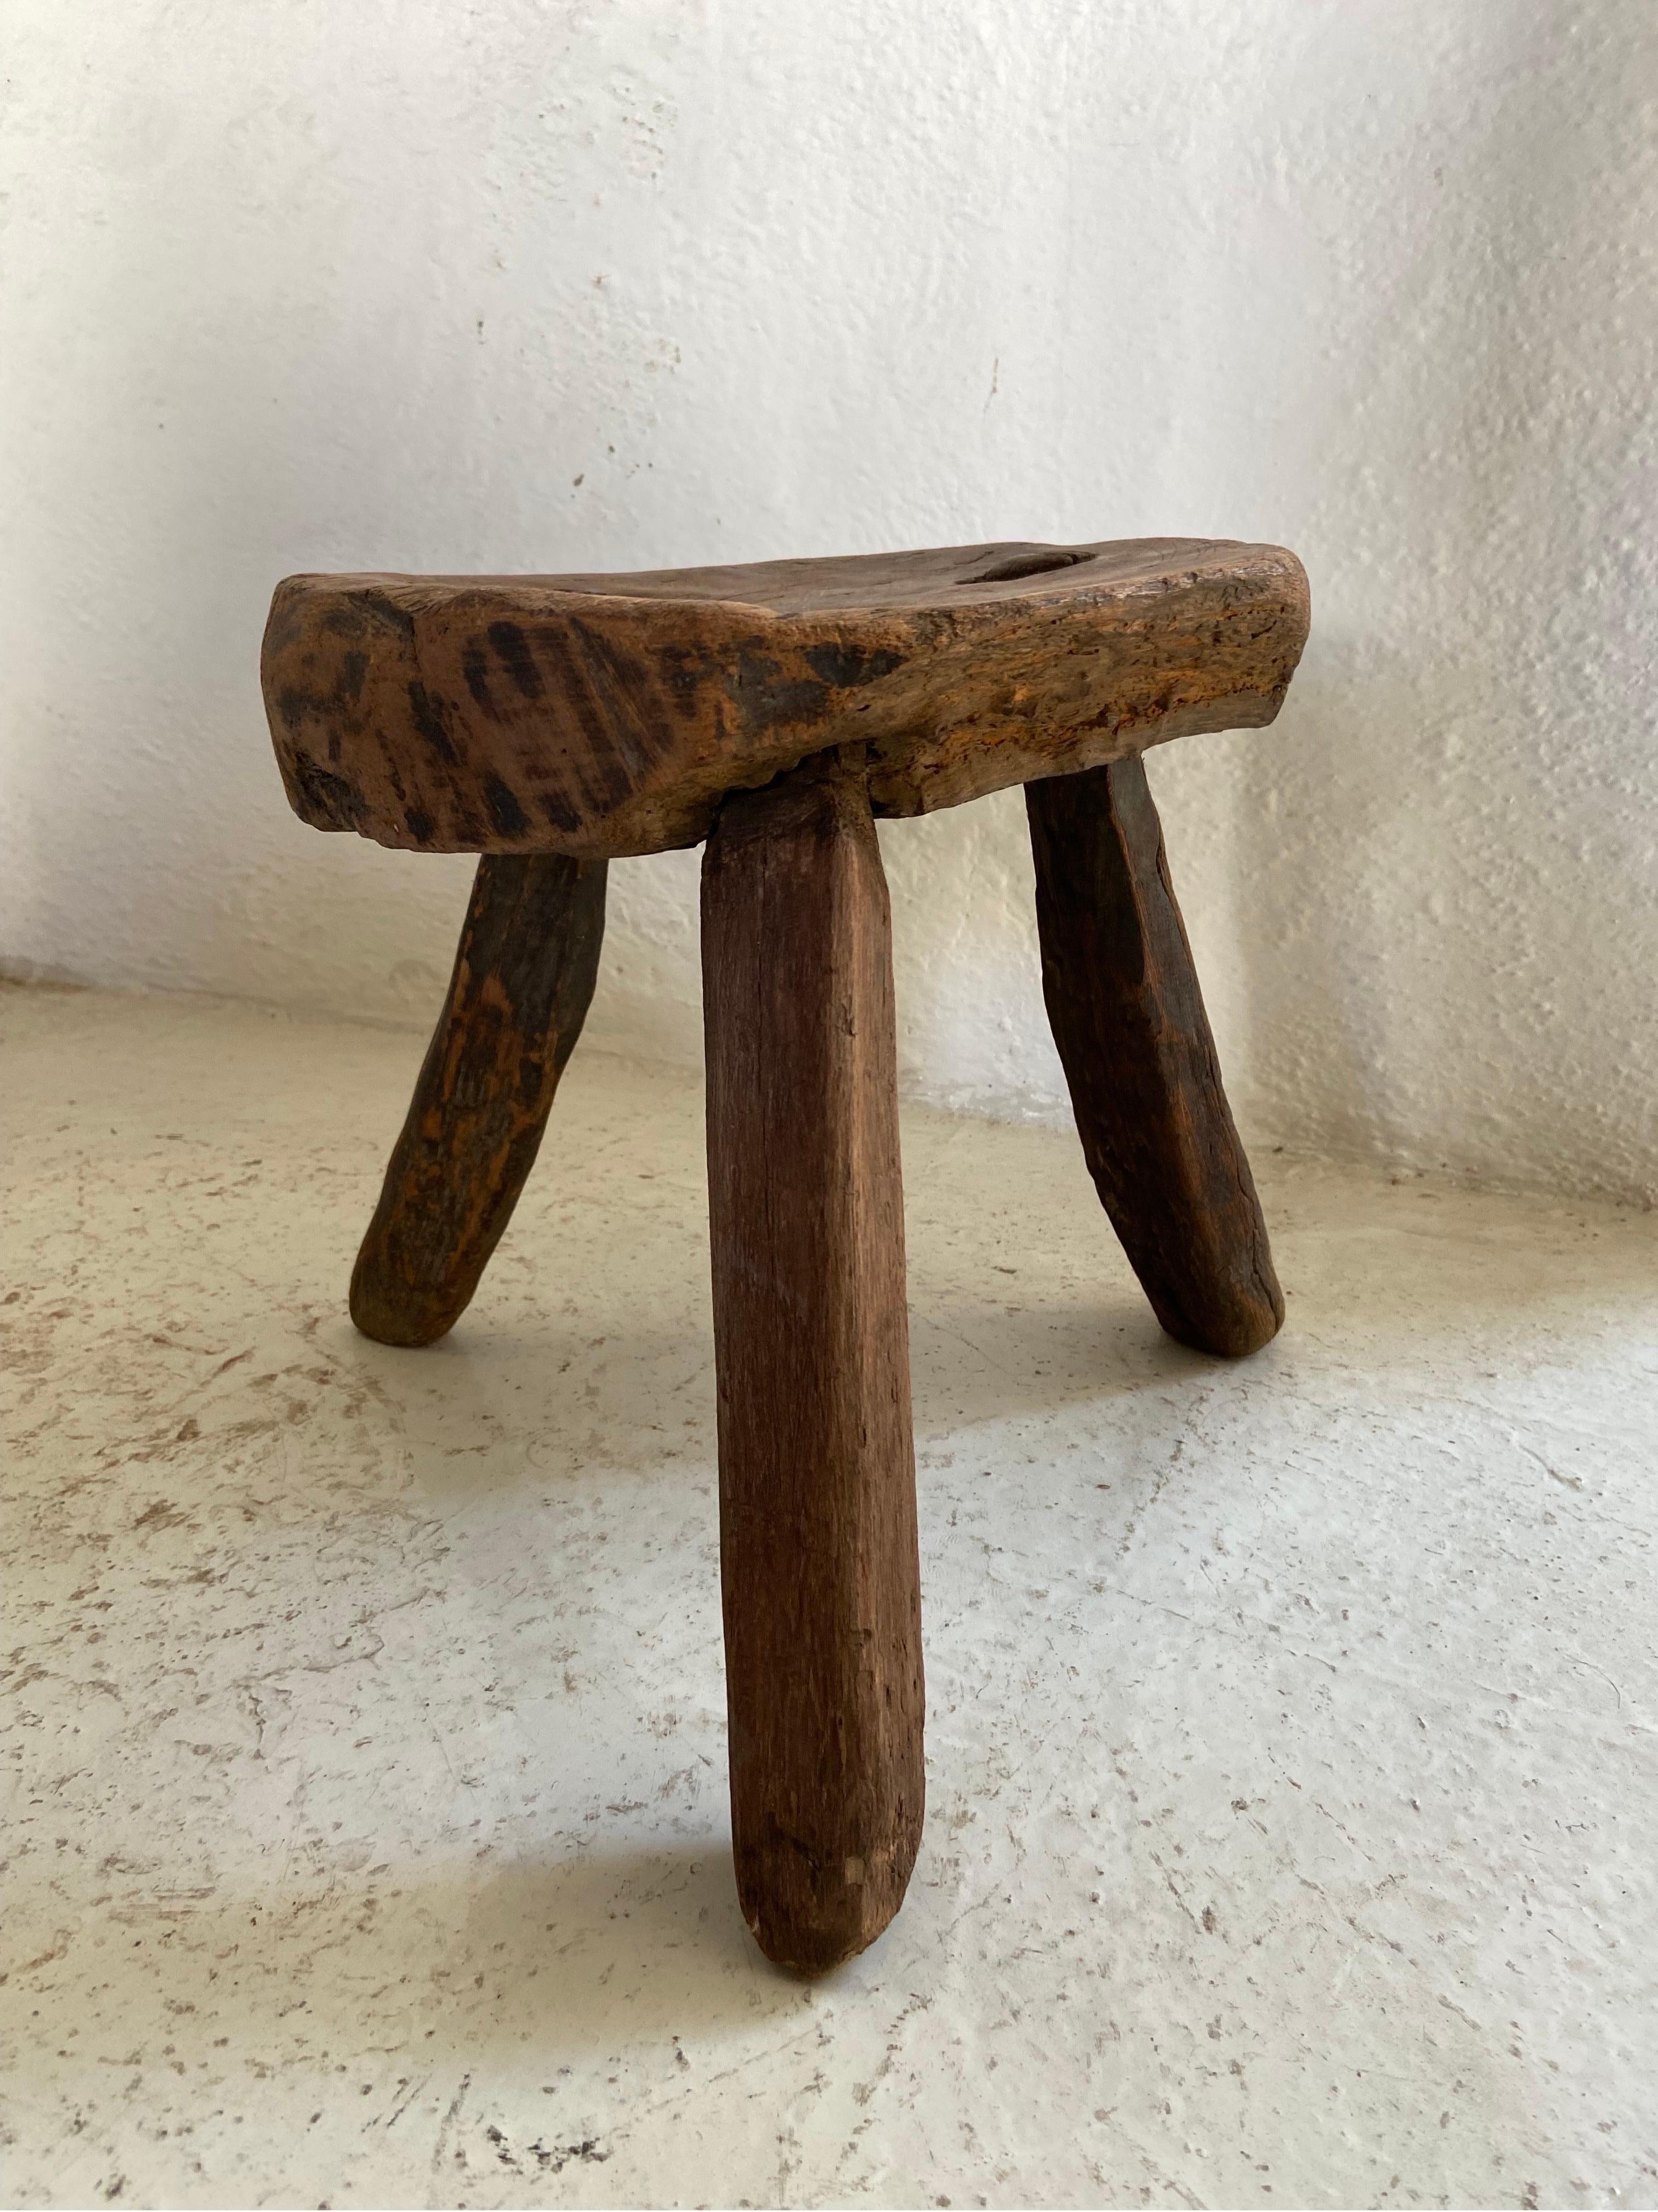 Hand-Crafted Mid 20th Century Stool From Mexico For Sale